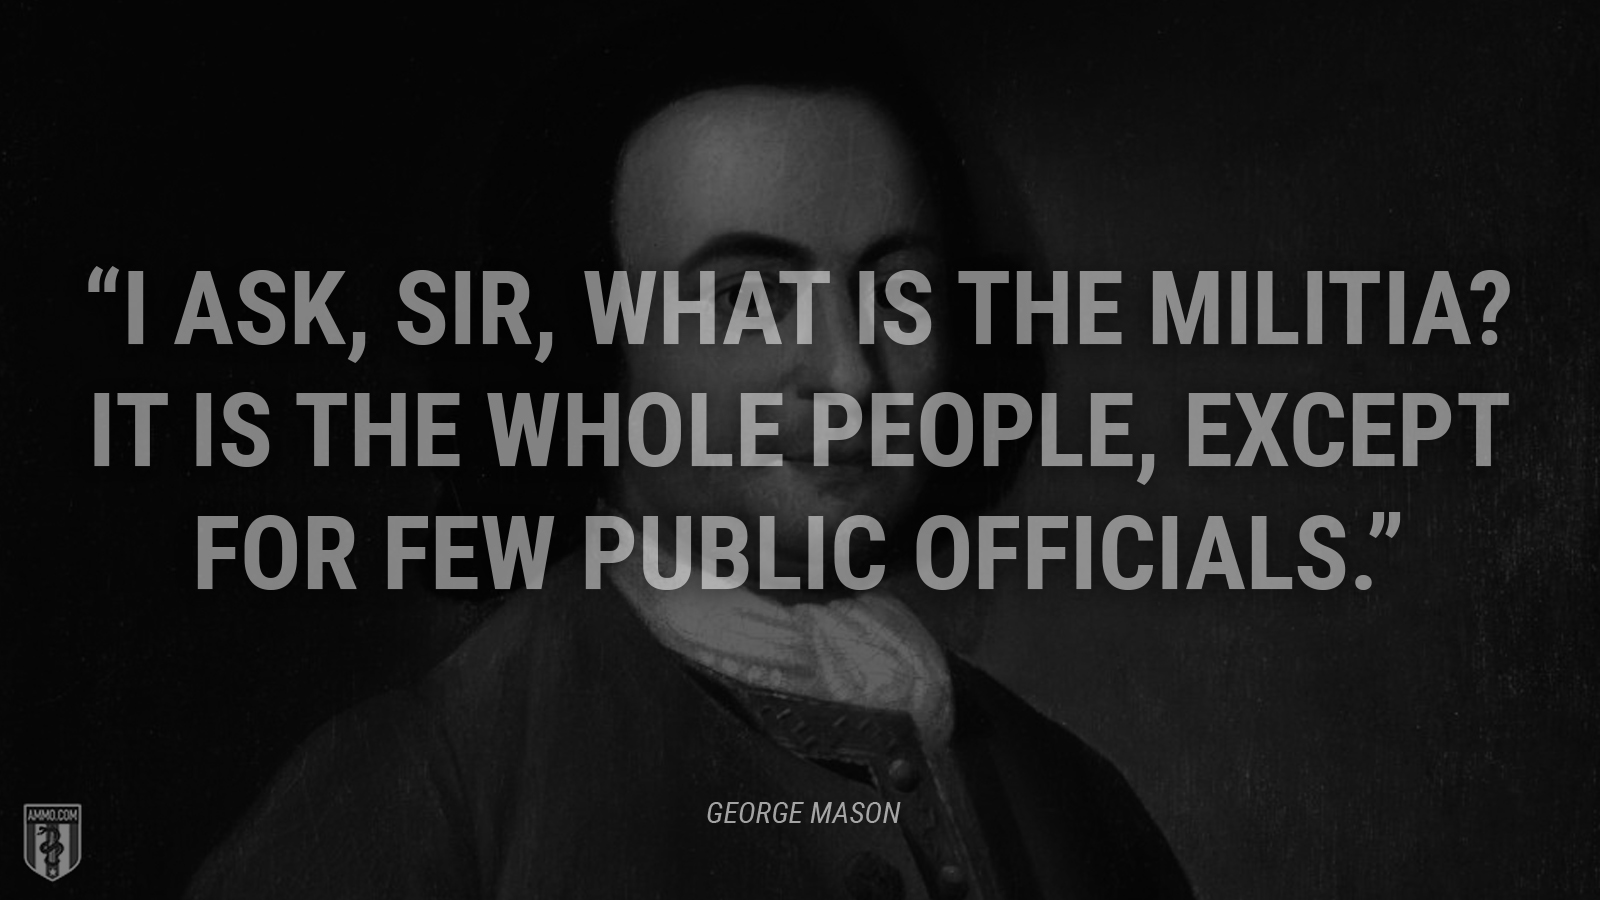 “I ask, sir, what is the militia? It is the whole people, except for few public officials.” - George Mason